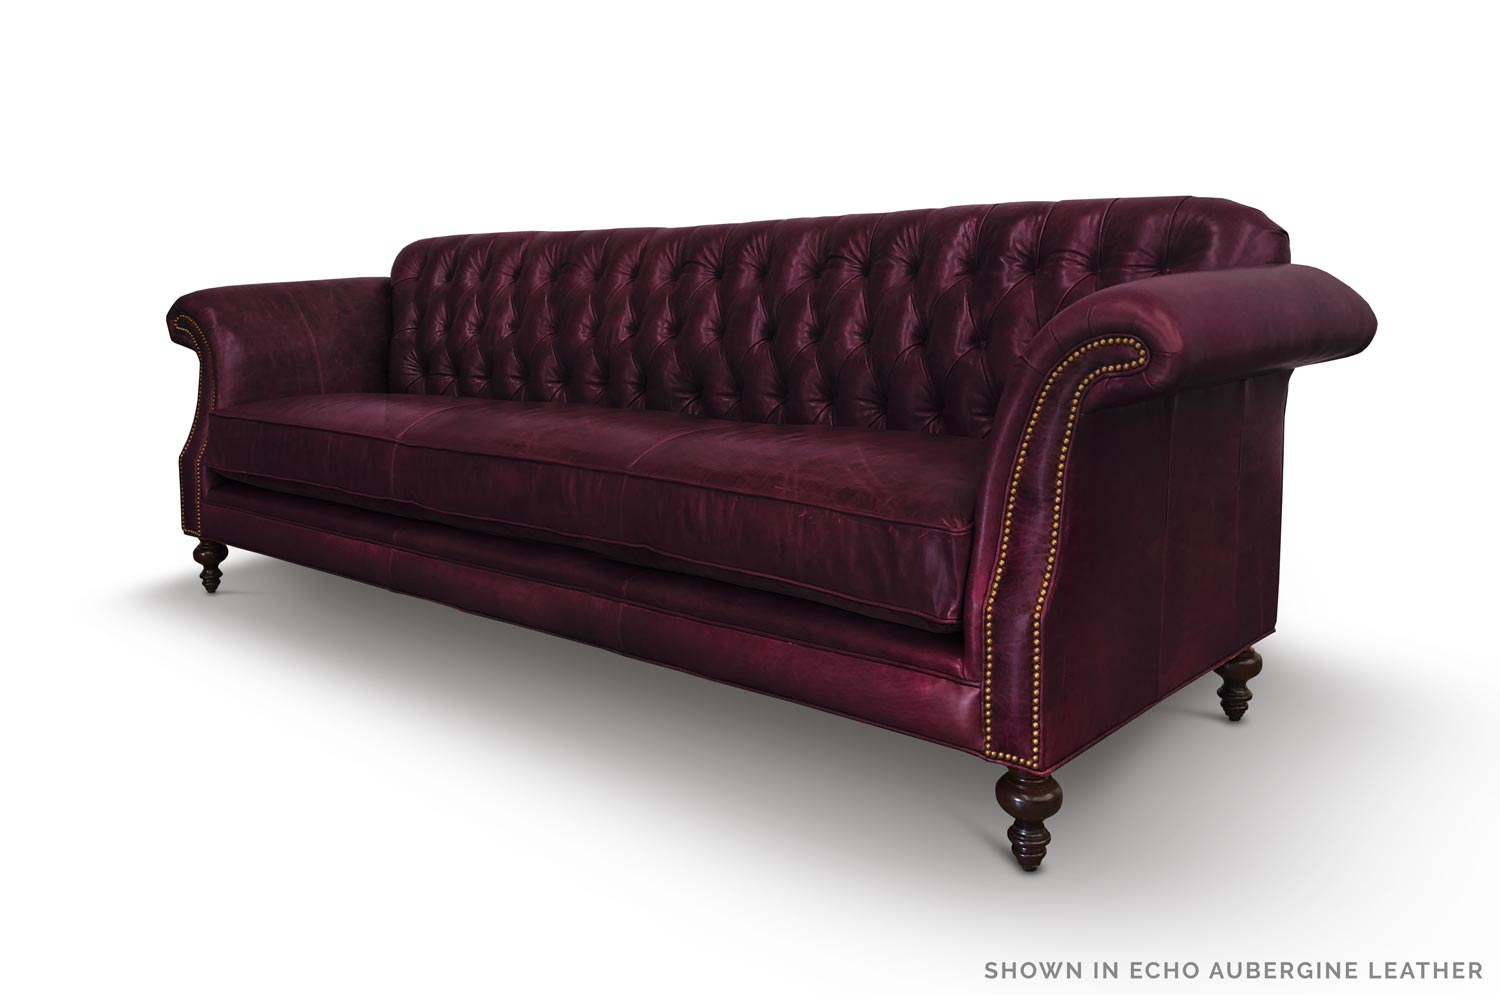 The Riley: High Back Scroll Arm Tufted Chesterfield Sofa in Echo Aubergine Leather